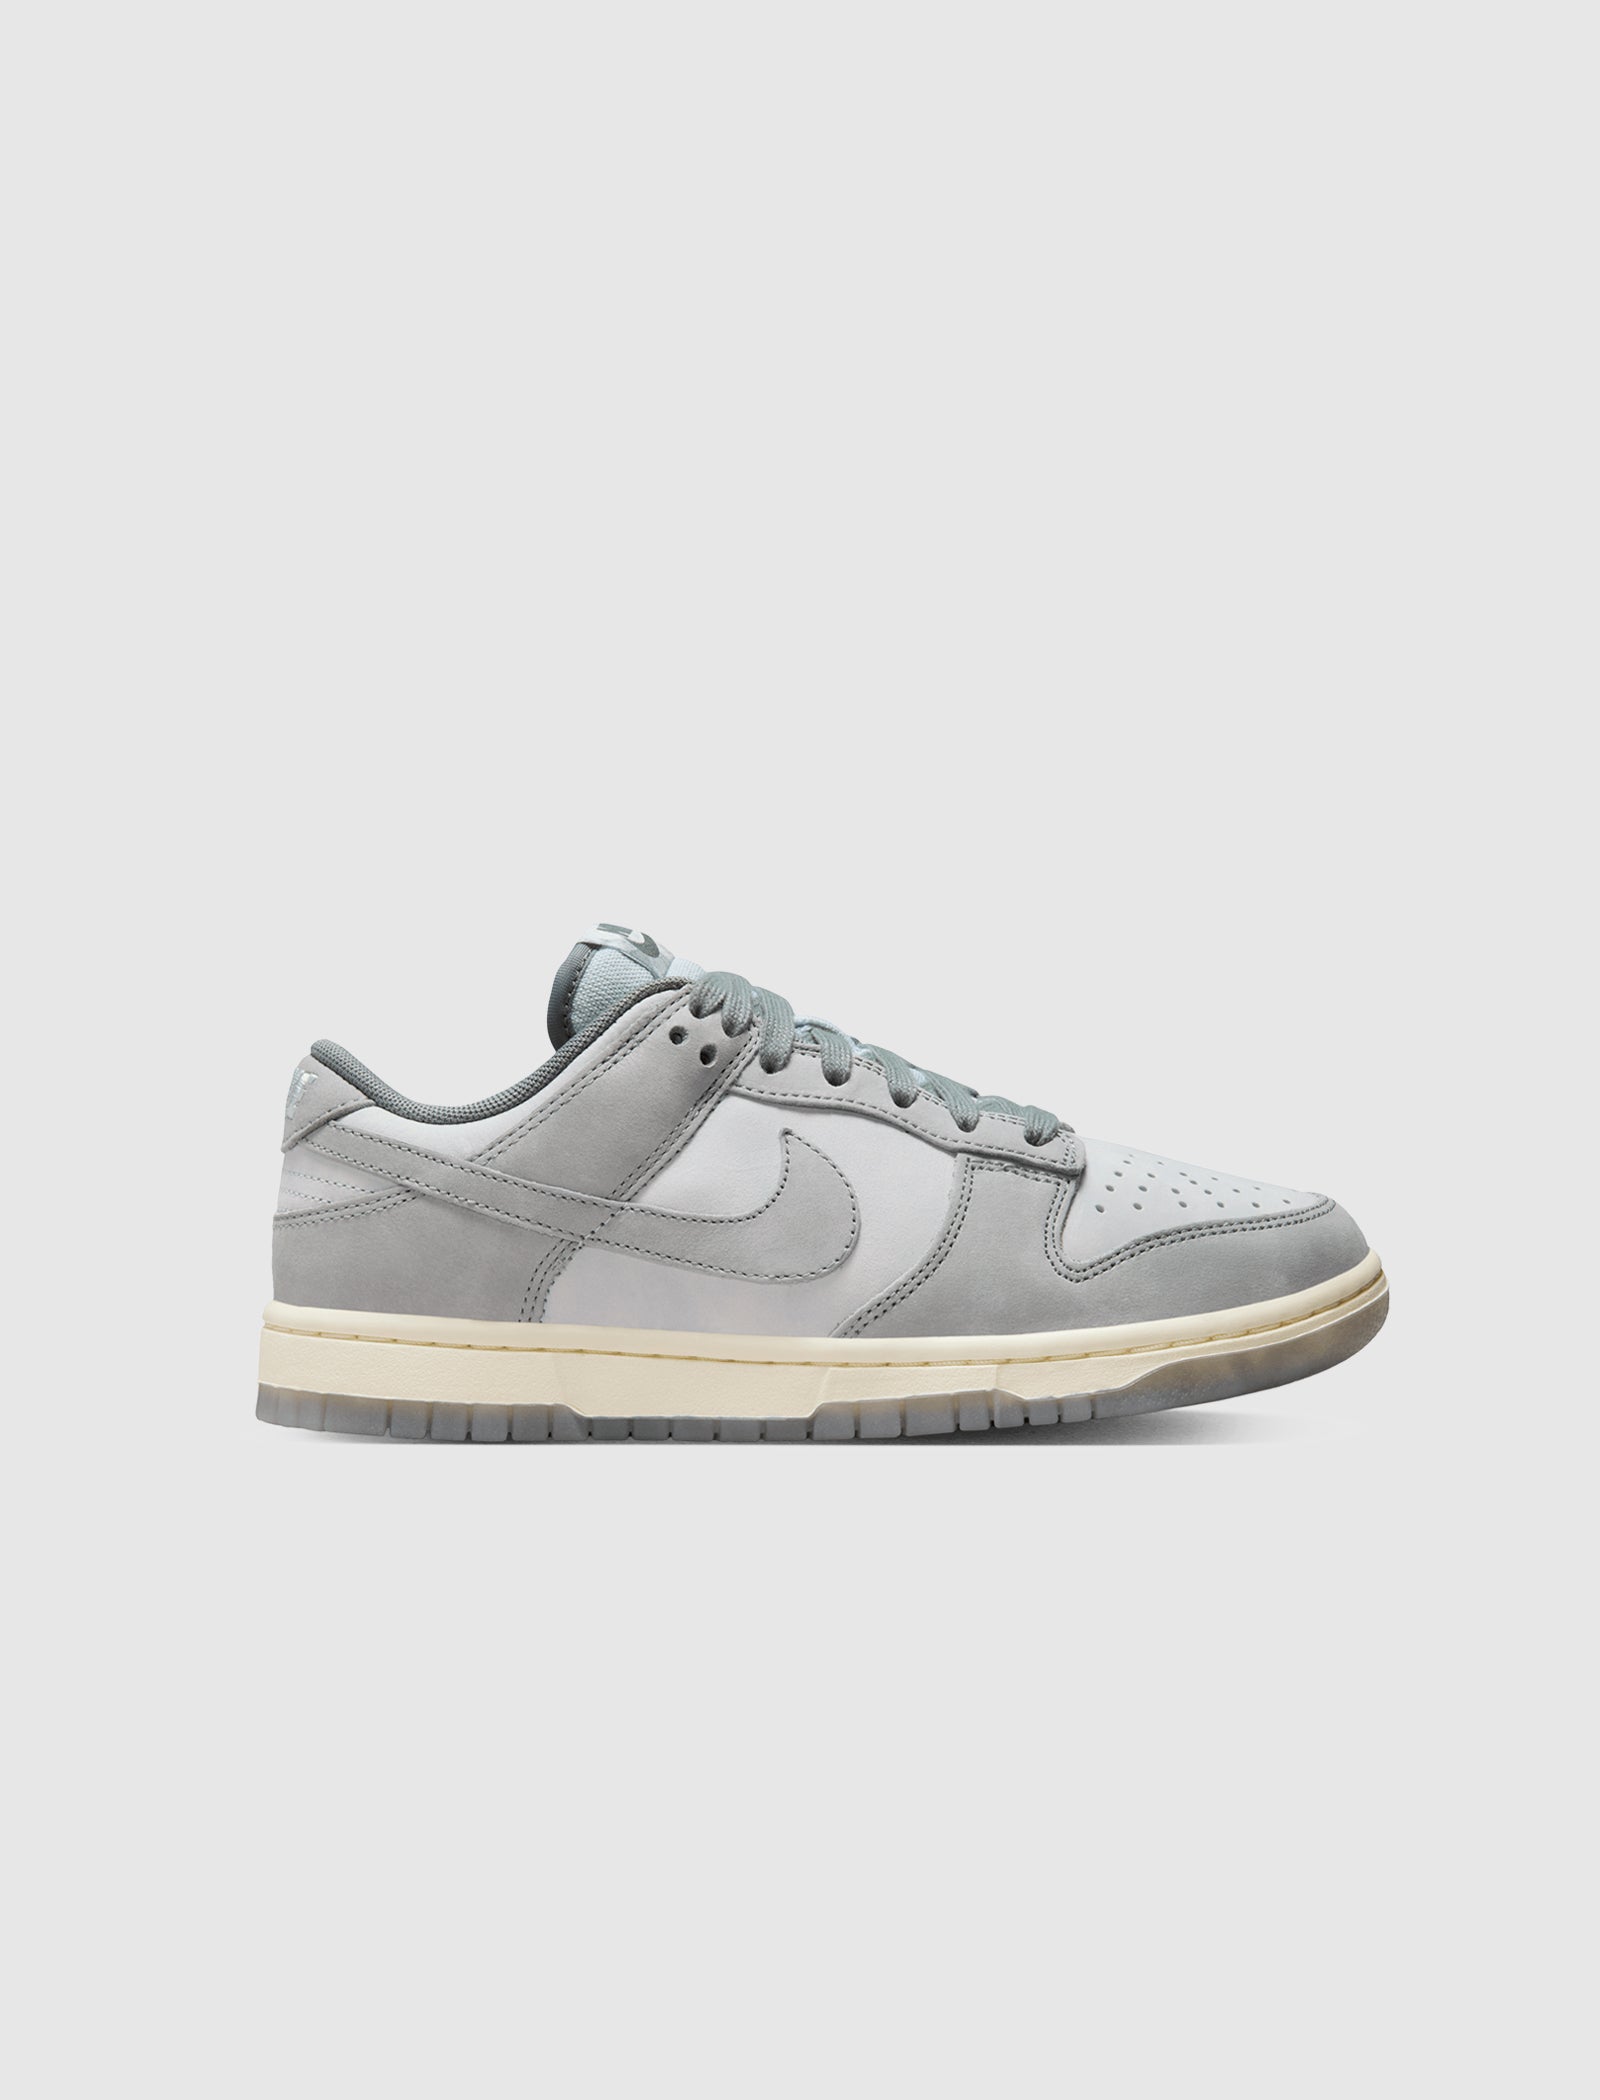 This Nike Dunk Low Features Mini Swoosh Details And A Wolf Grey